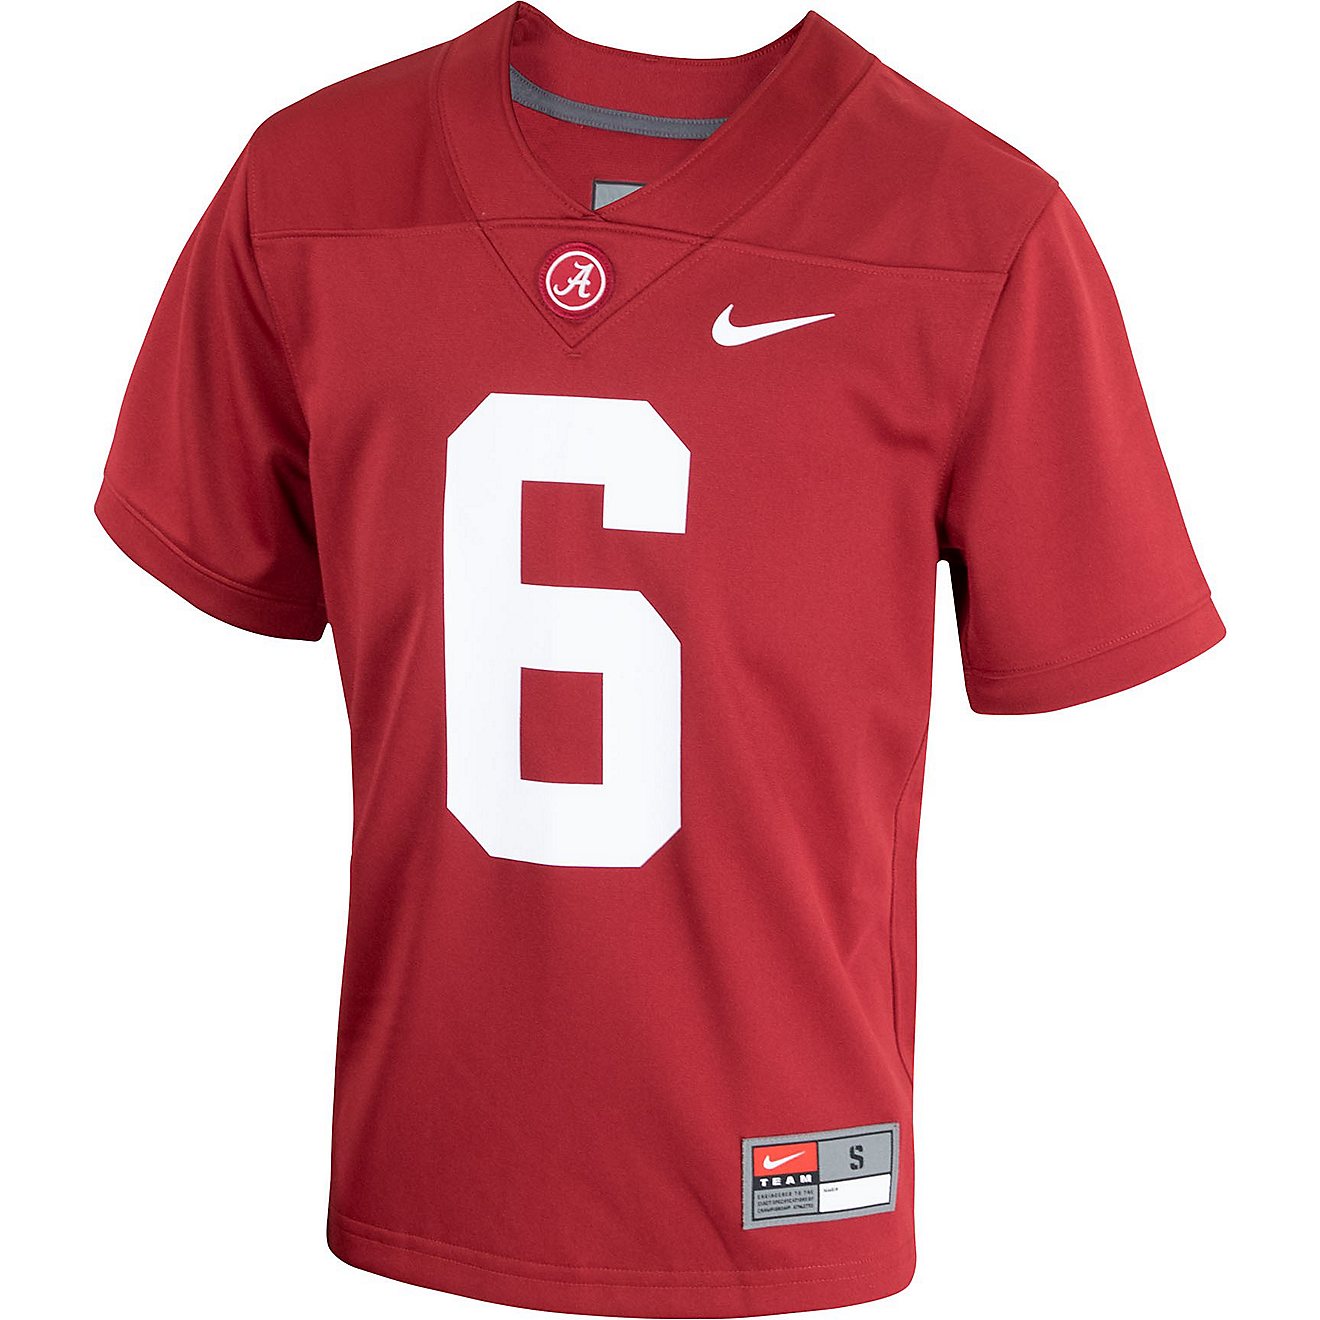 Nike Youth University of Alabama Smith Replica Football Jersey                                                                   - view number 1